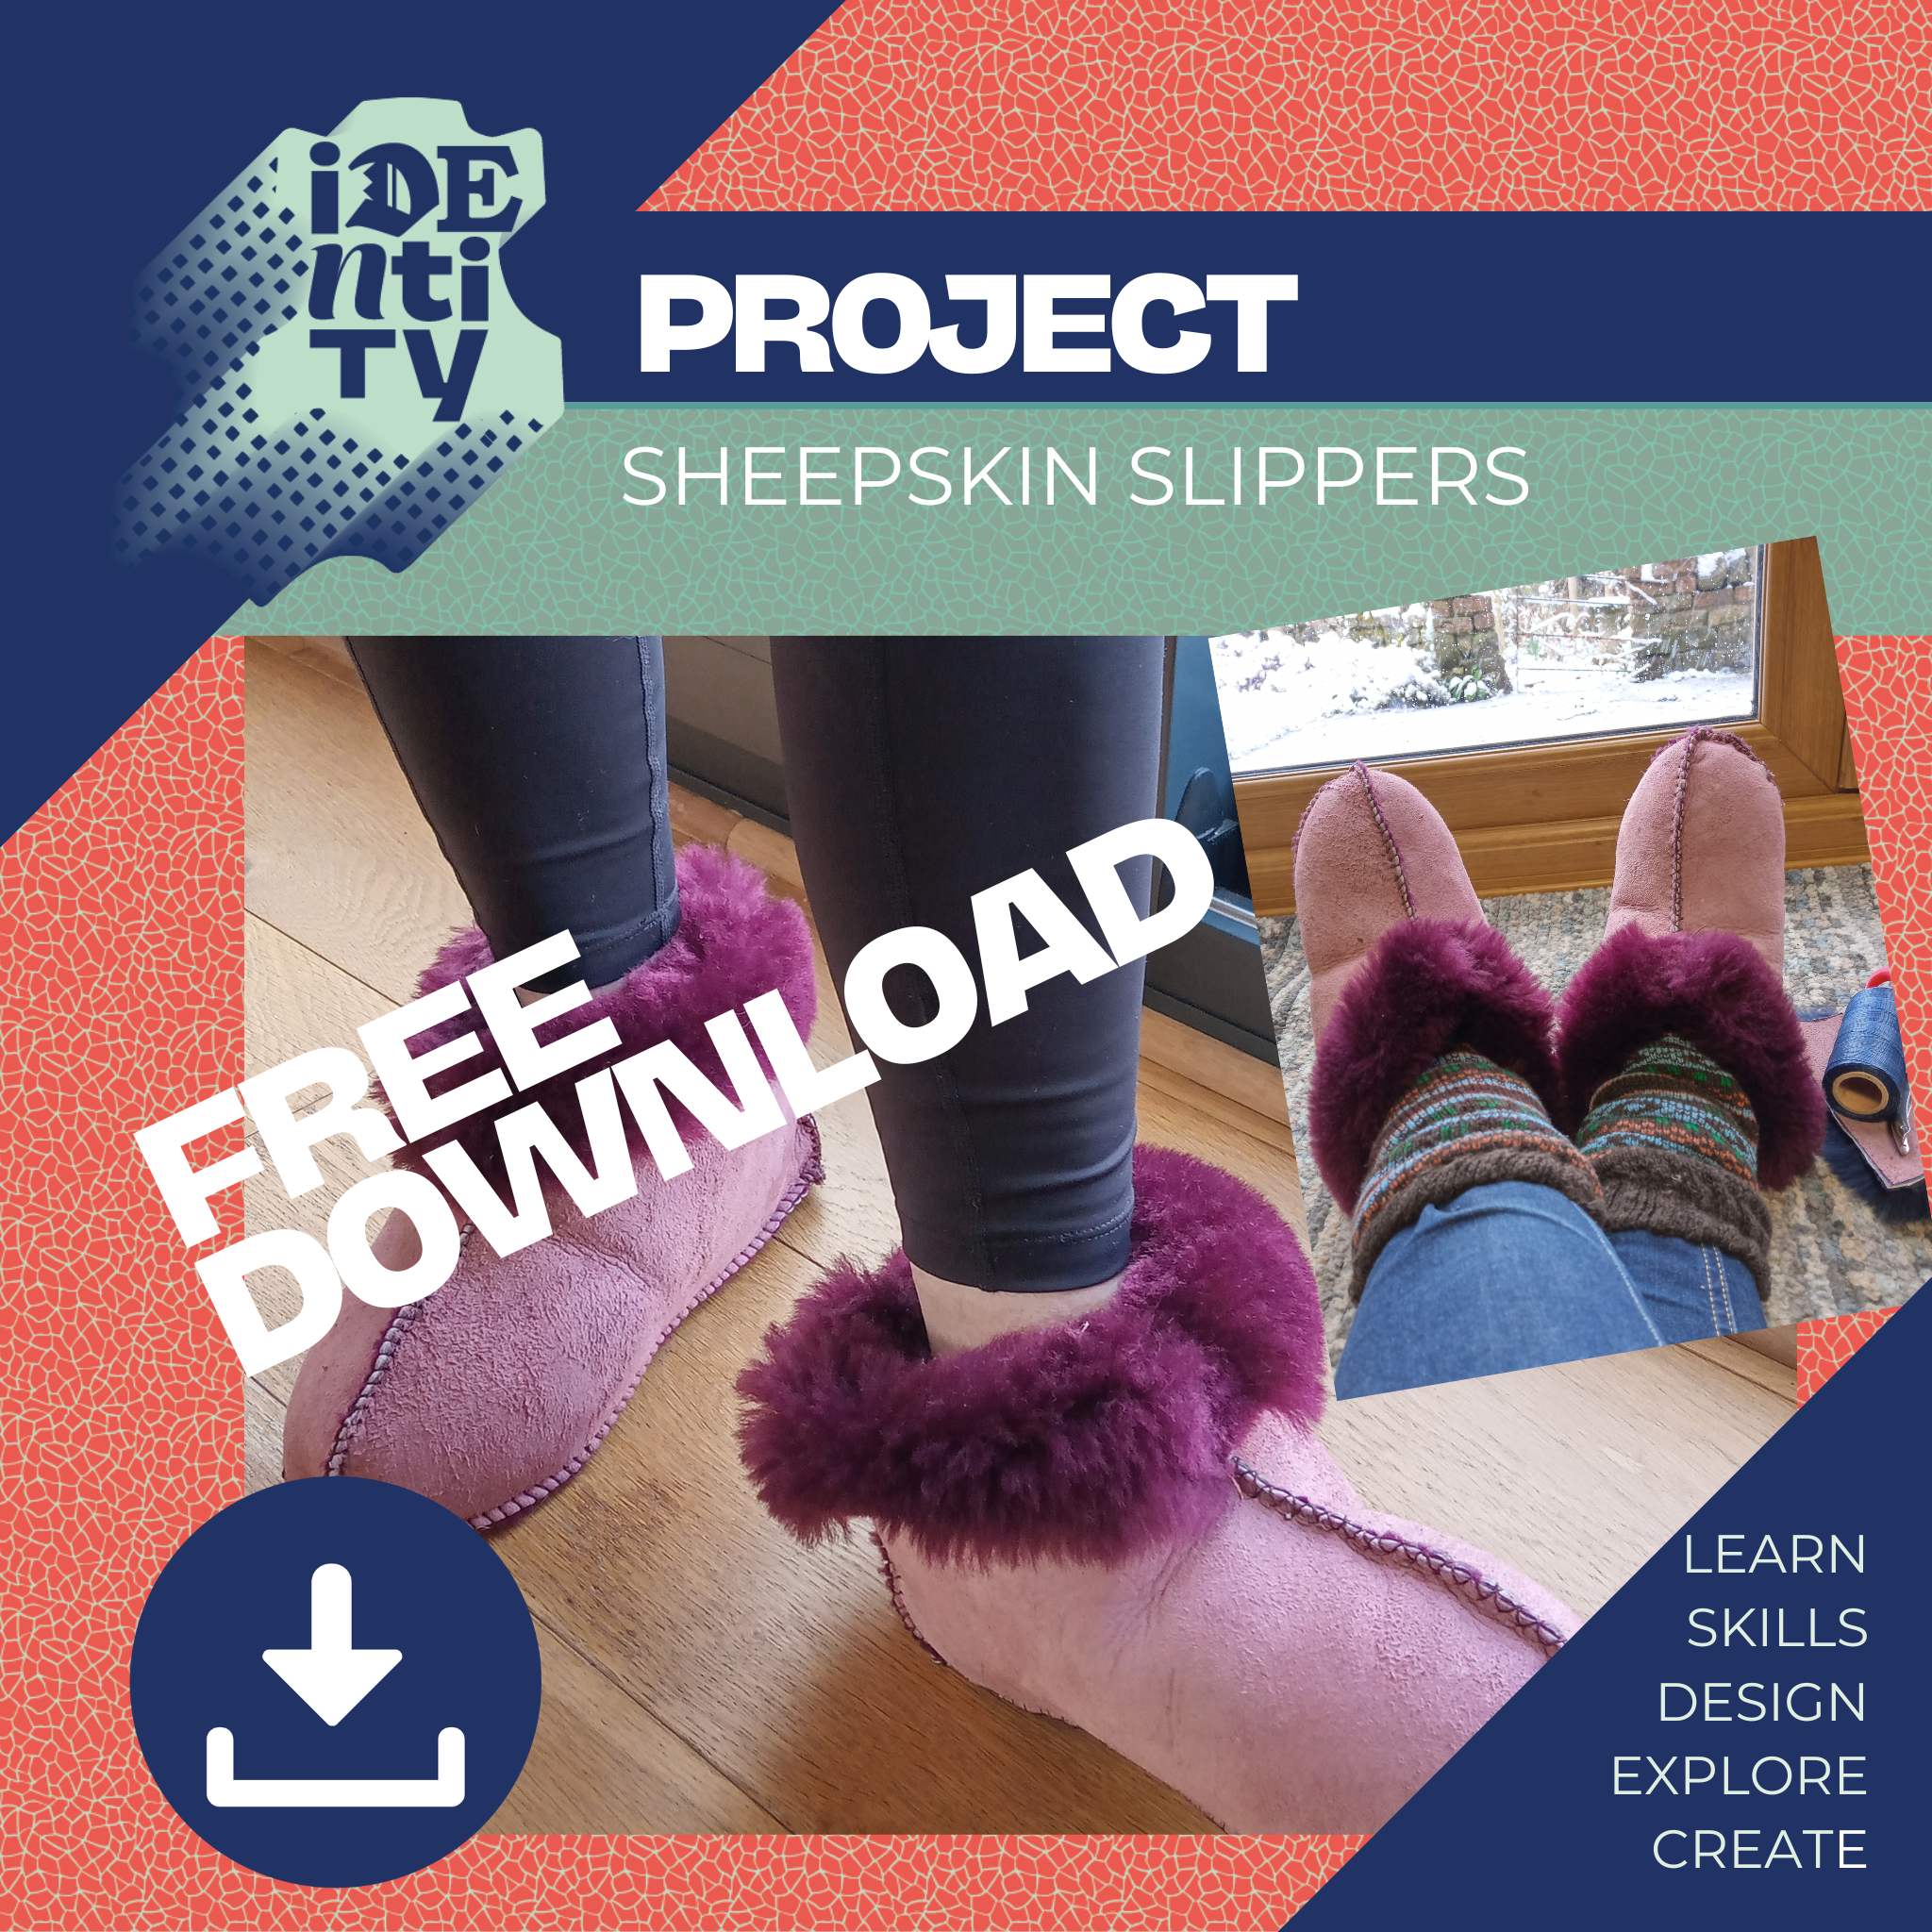 Click the link in the product description  for our free project for making your own sheepskin slippers